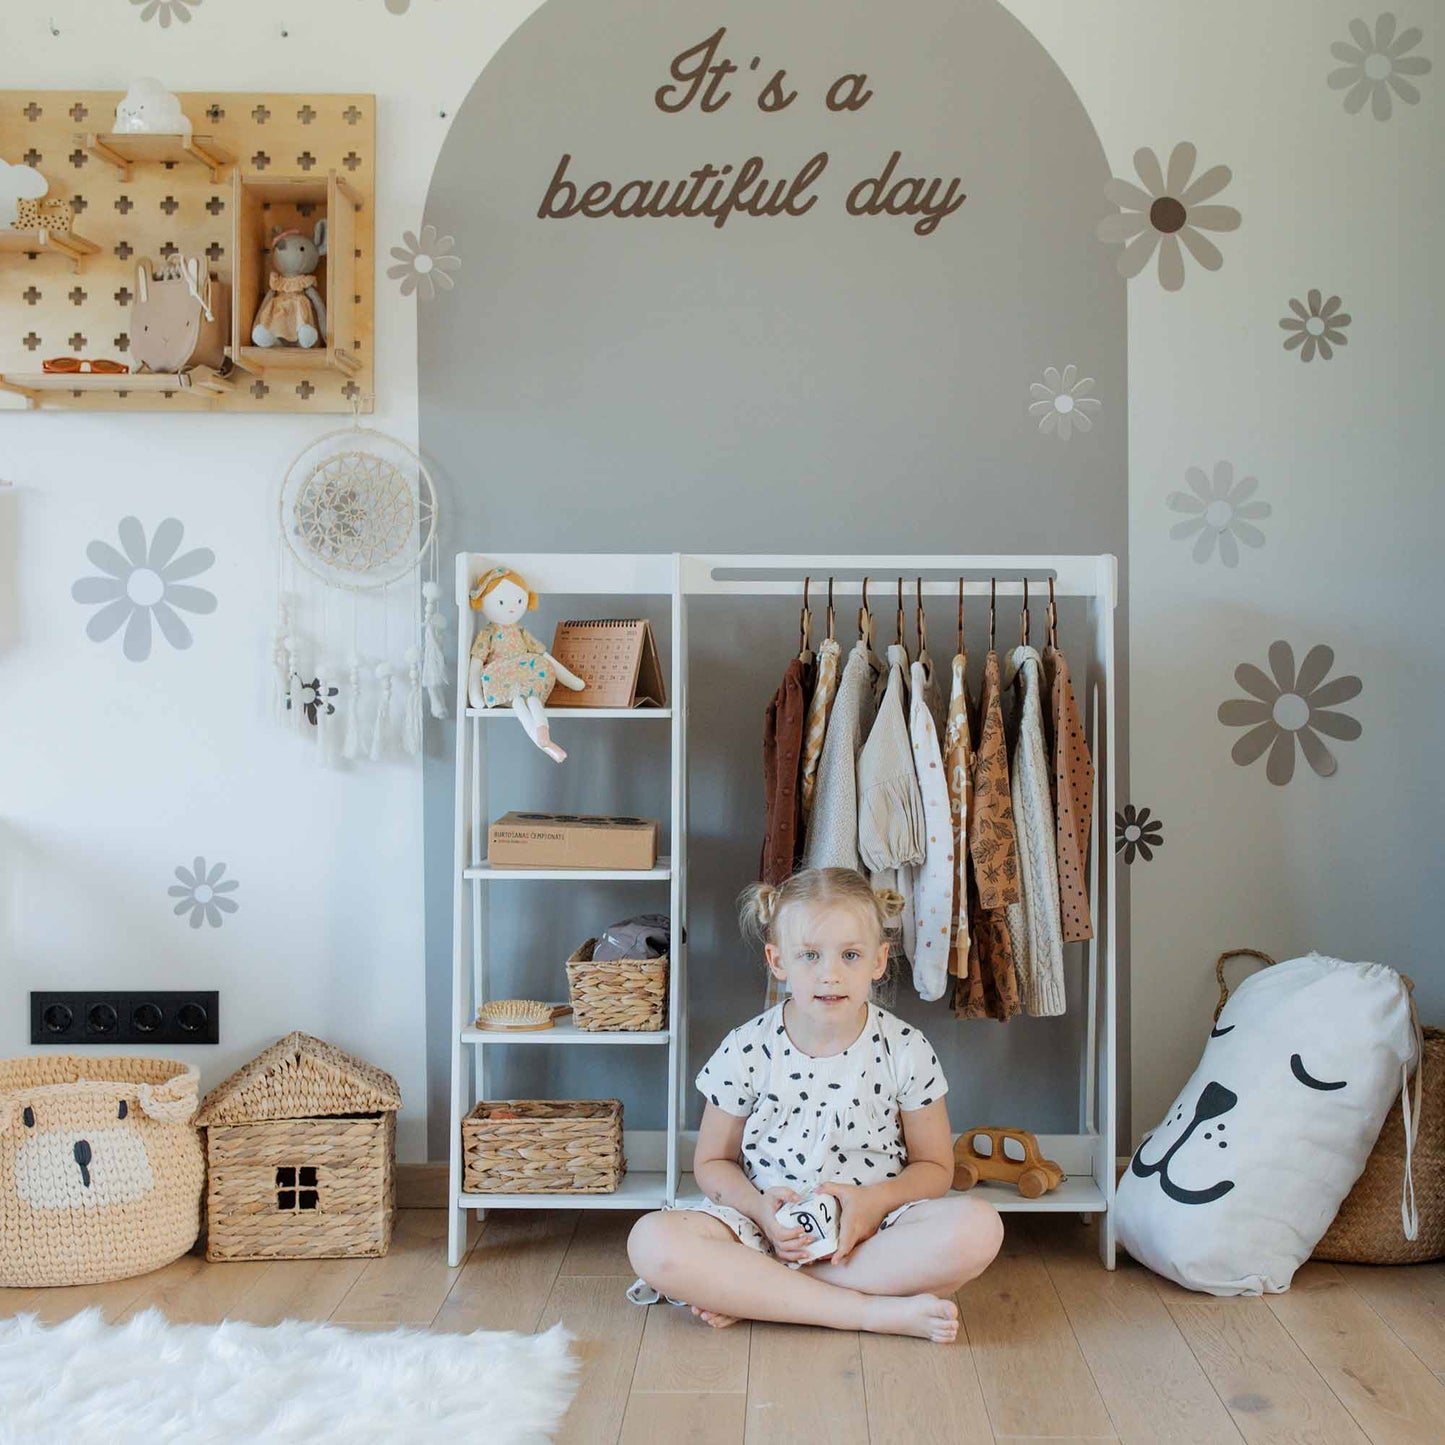 A child sits on a wooden floor in a Montessori-inspired room with a Children's wardrobe, dress up clothing rack, woven baskets, storage shelves lined with dolls, and a pillow. The wall behind features floral designs and the text "It's a beautiful day.